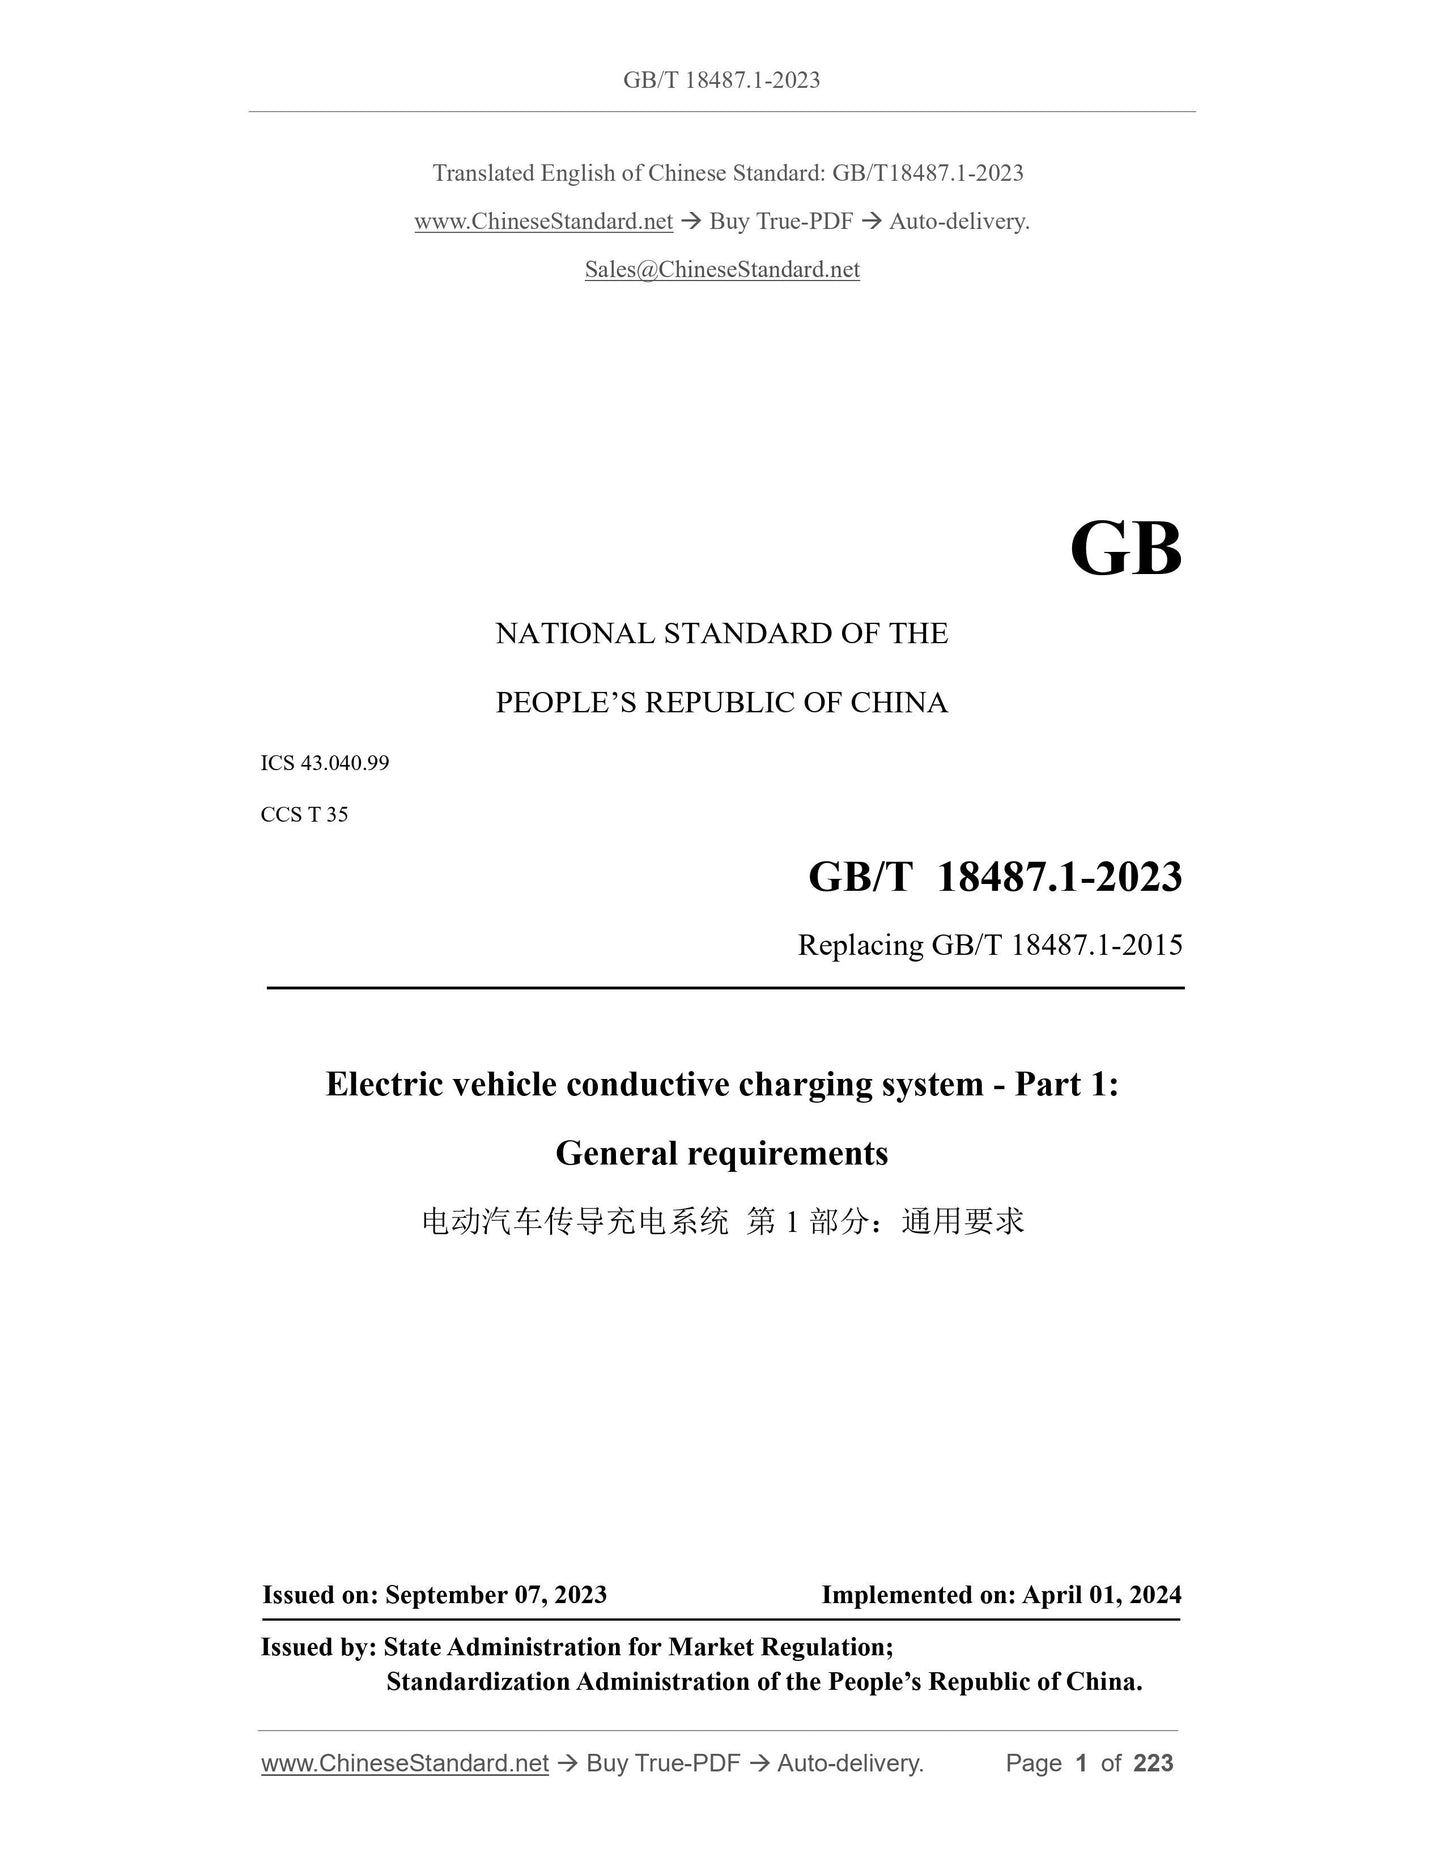 GB/T 18487.1-2023 Page 1